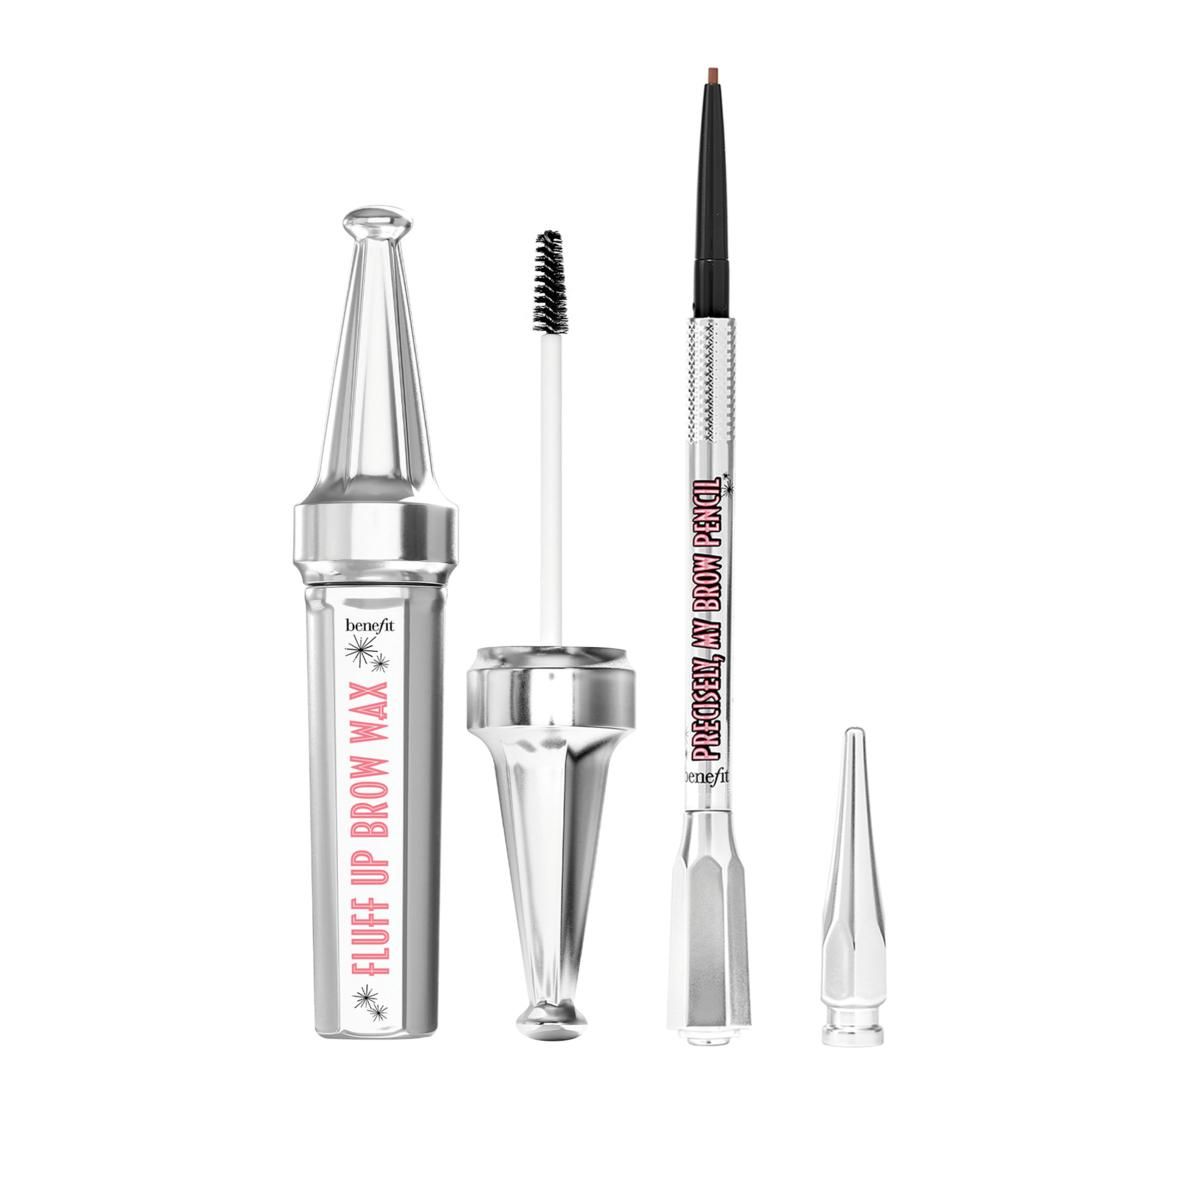 Benefit Cosmetics Precisely My Brow Pencil & Fluff Up Brow Wax Set | HSN